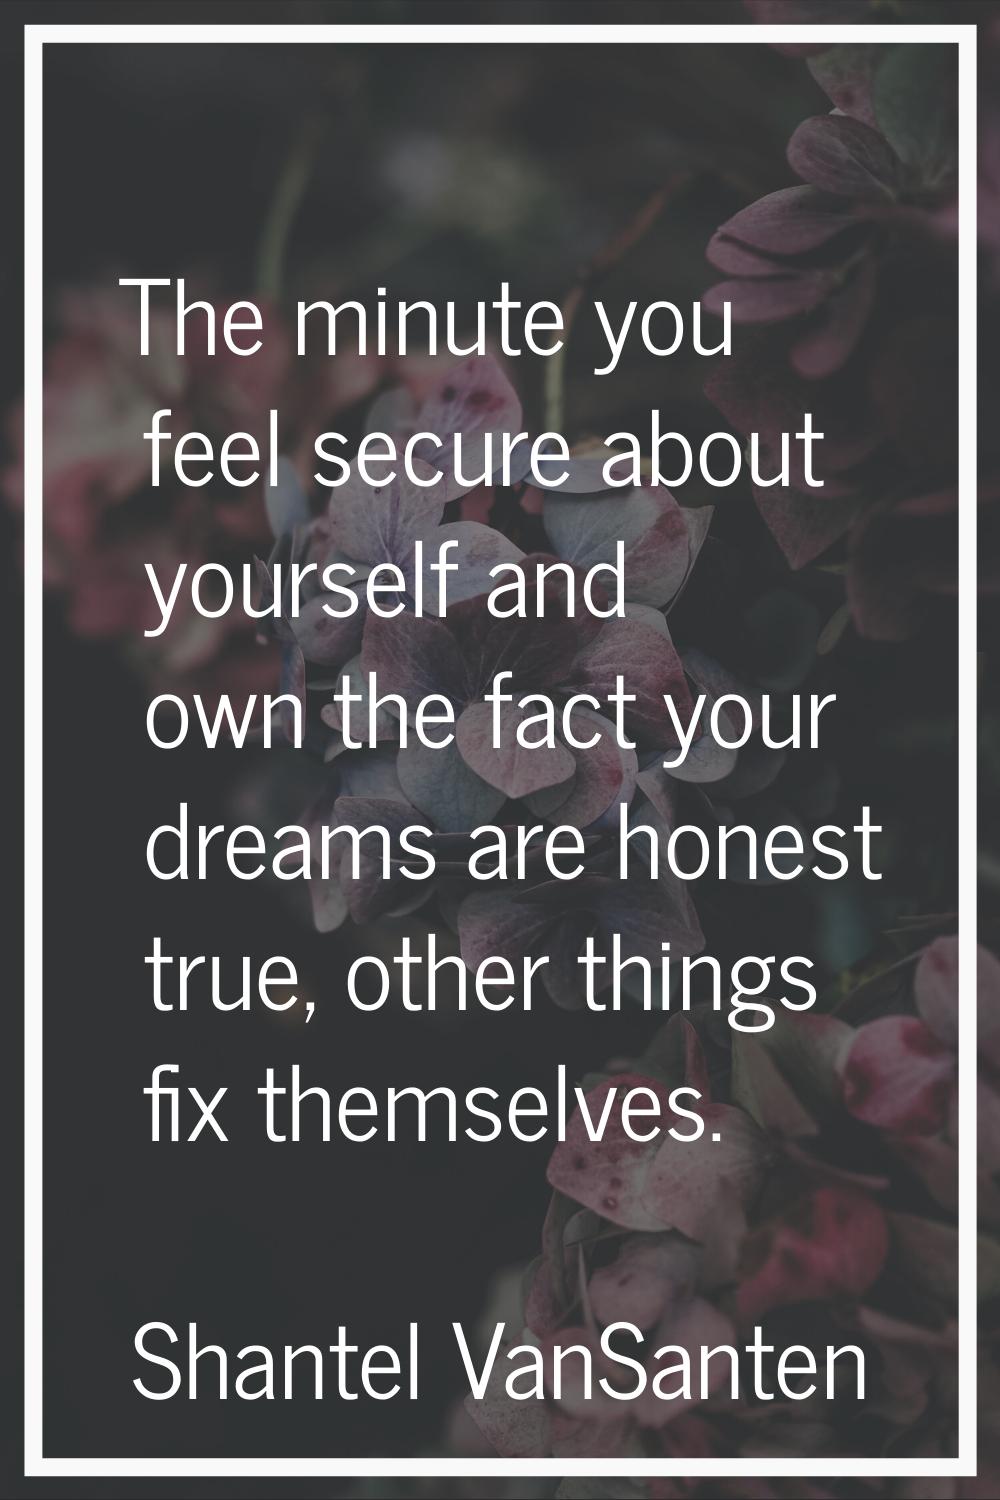 The minute you feel secure about yourself and own the fact your dreams are honest true, other thing